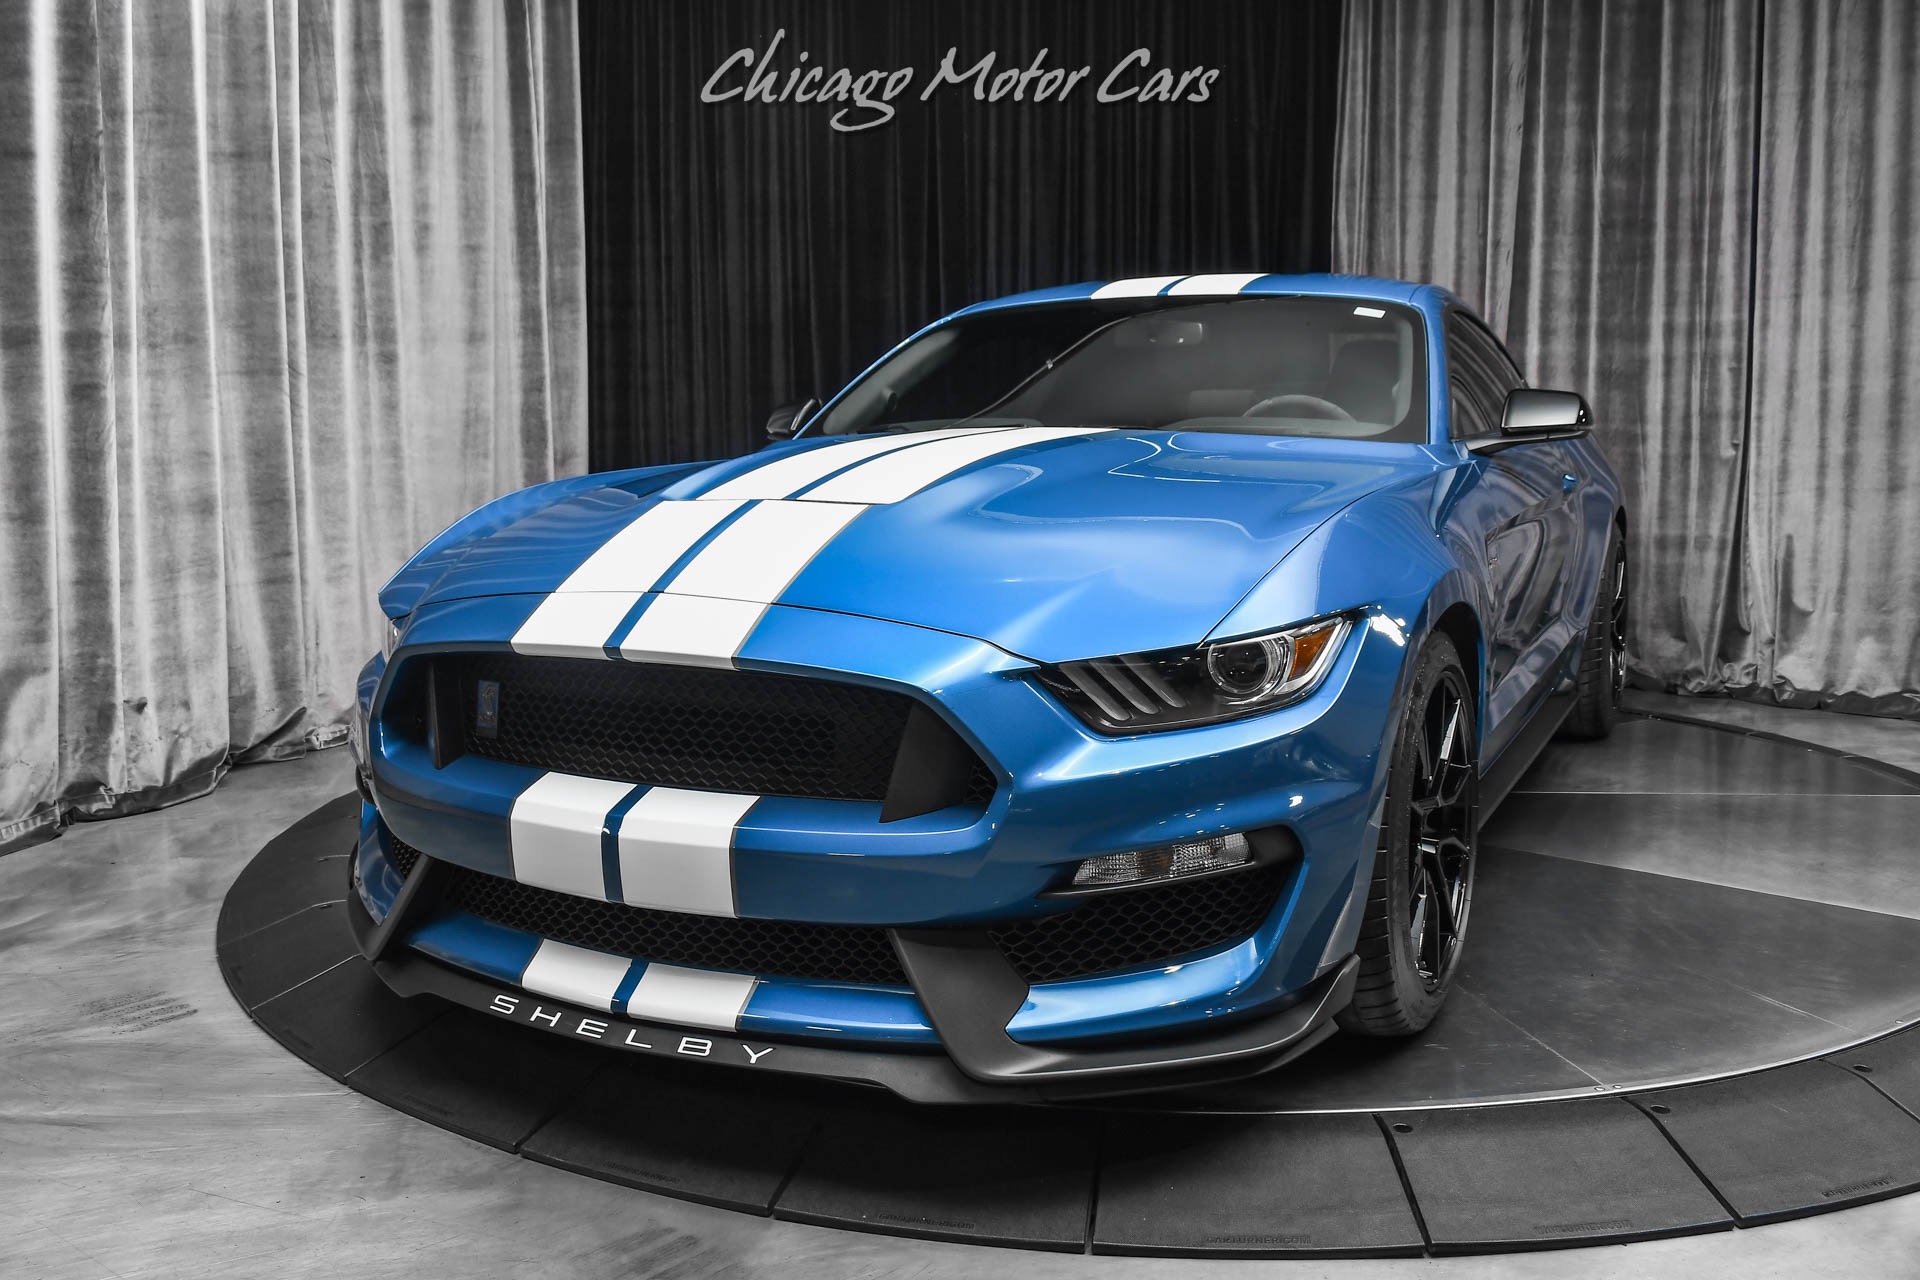 Used 2020 Ford Mustang Shelby GT350 Tech Package! 4k Miles! Handling ...